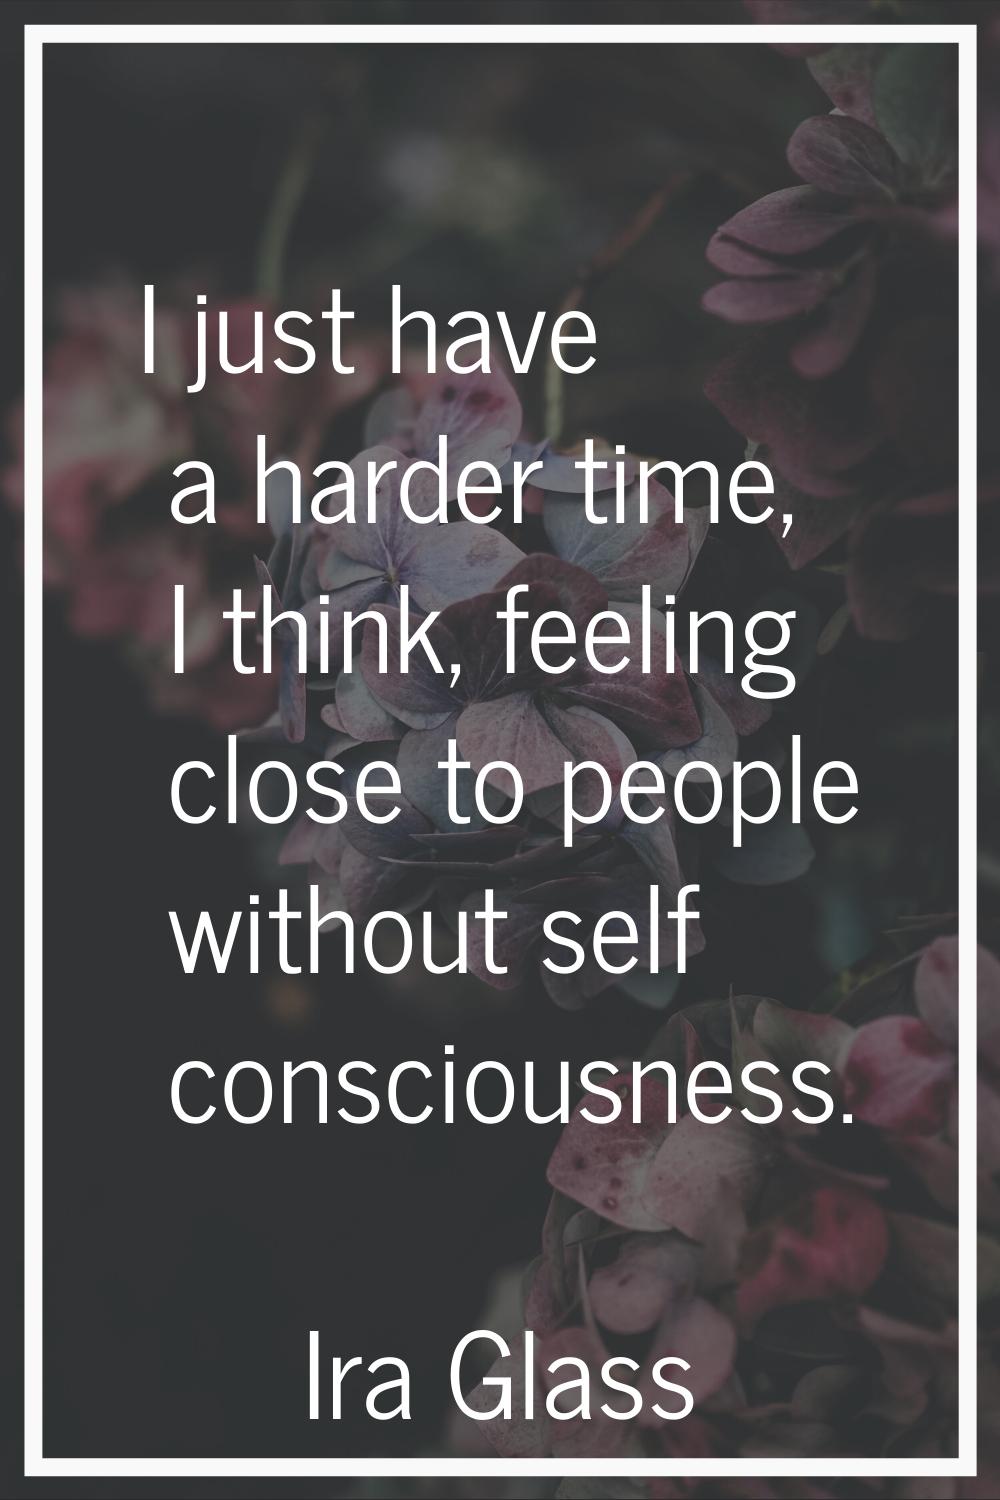 I just have a harder time, I think, feeling close to people without self consciousness.